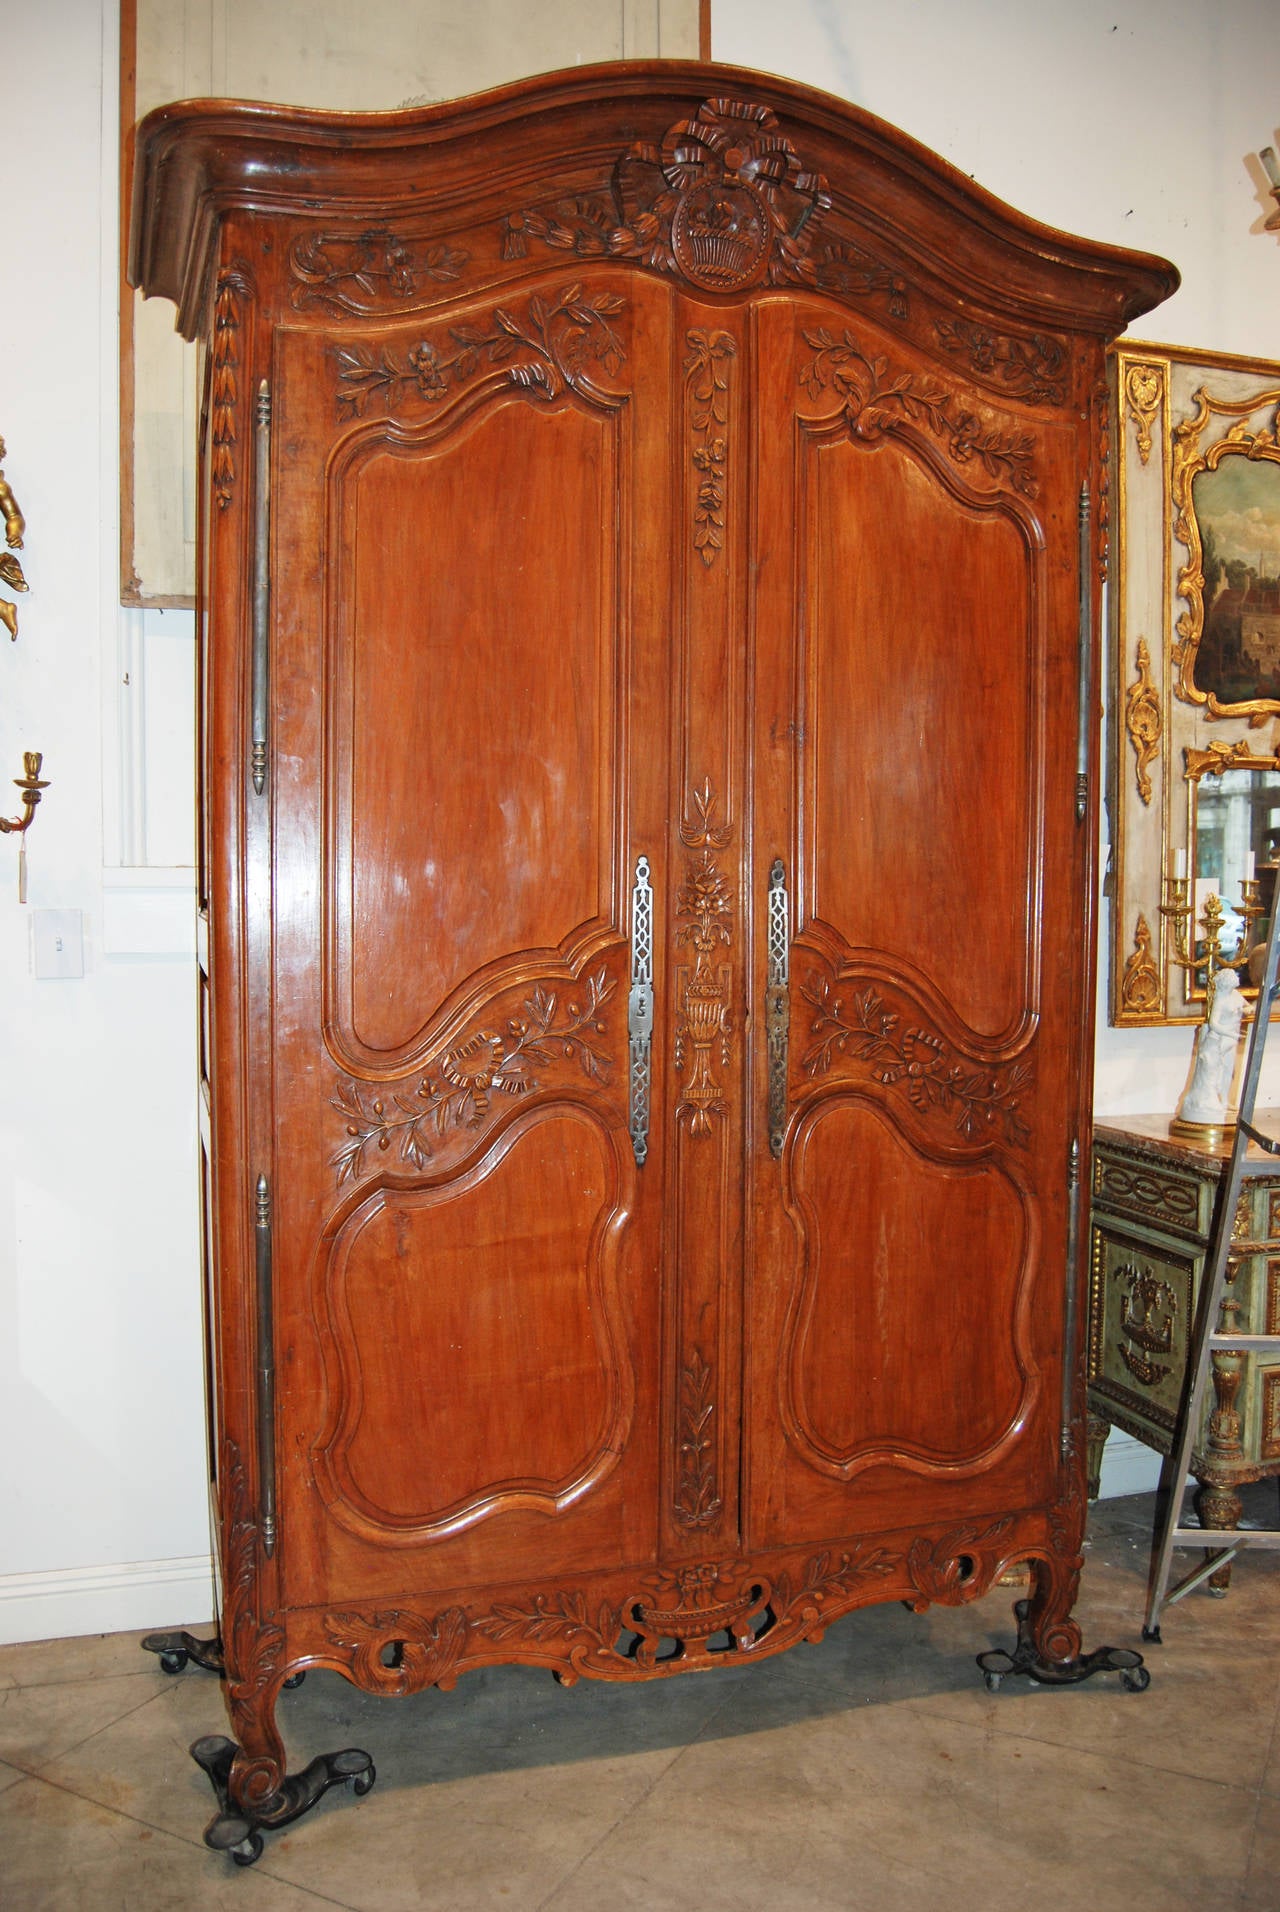 Beautifully carved walnut armoire from the Normandy region of France.